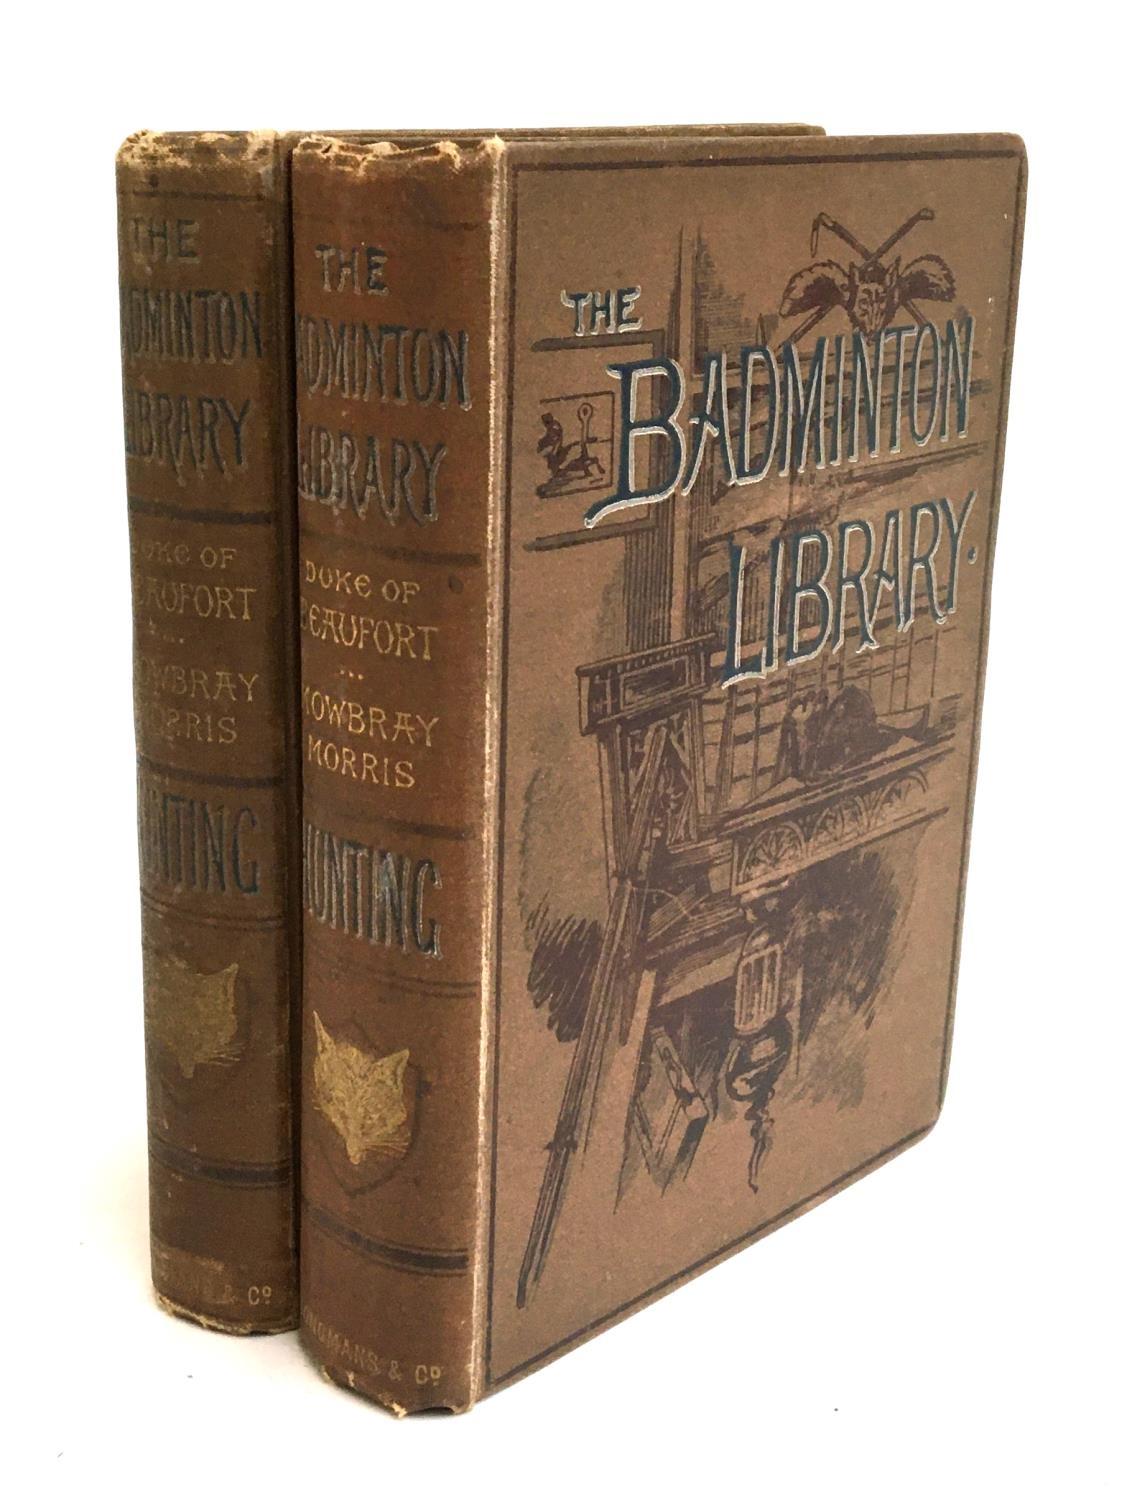 The Duke of Beaufort, 'The Badminton Library of Sports and Pastimes: Hunting', London: Longmans,